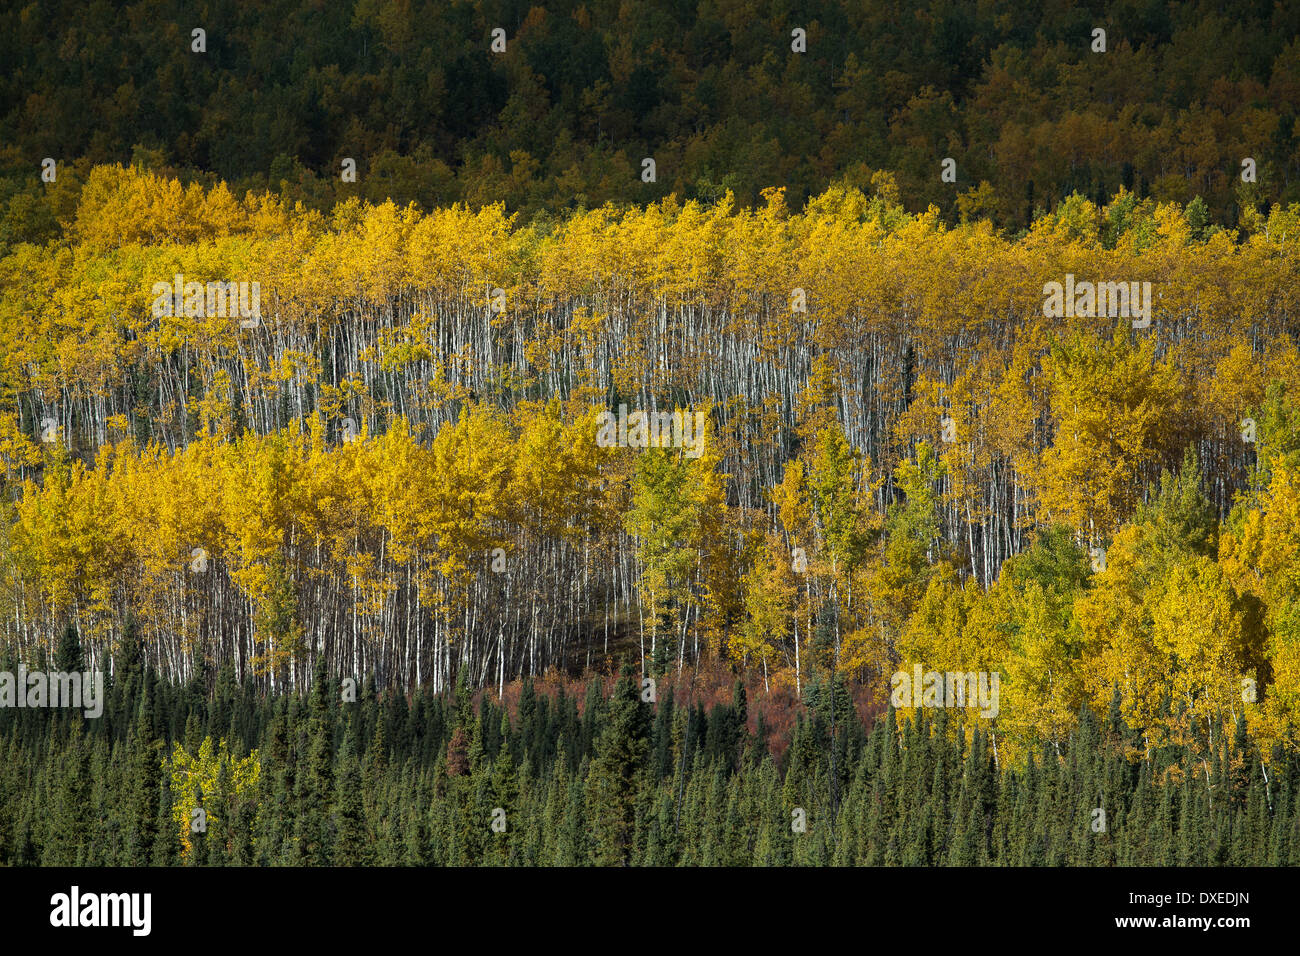 Couleurs d'automne nr Pelly Crossing, Yukon, Canada Banque D'Images